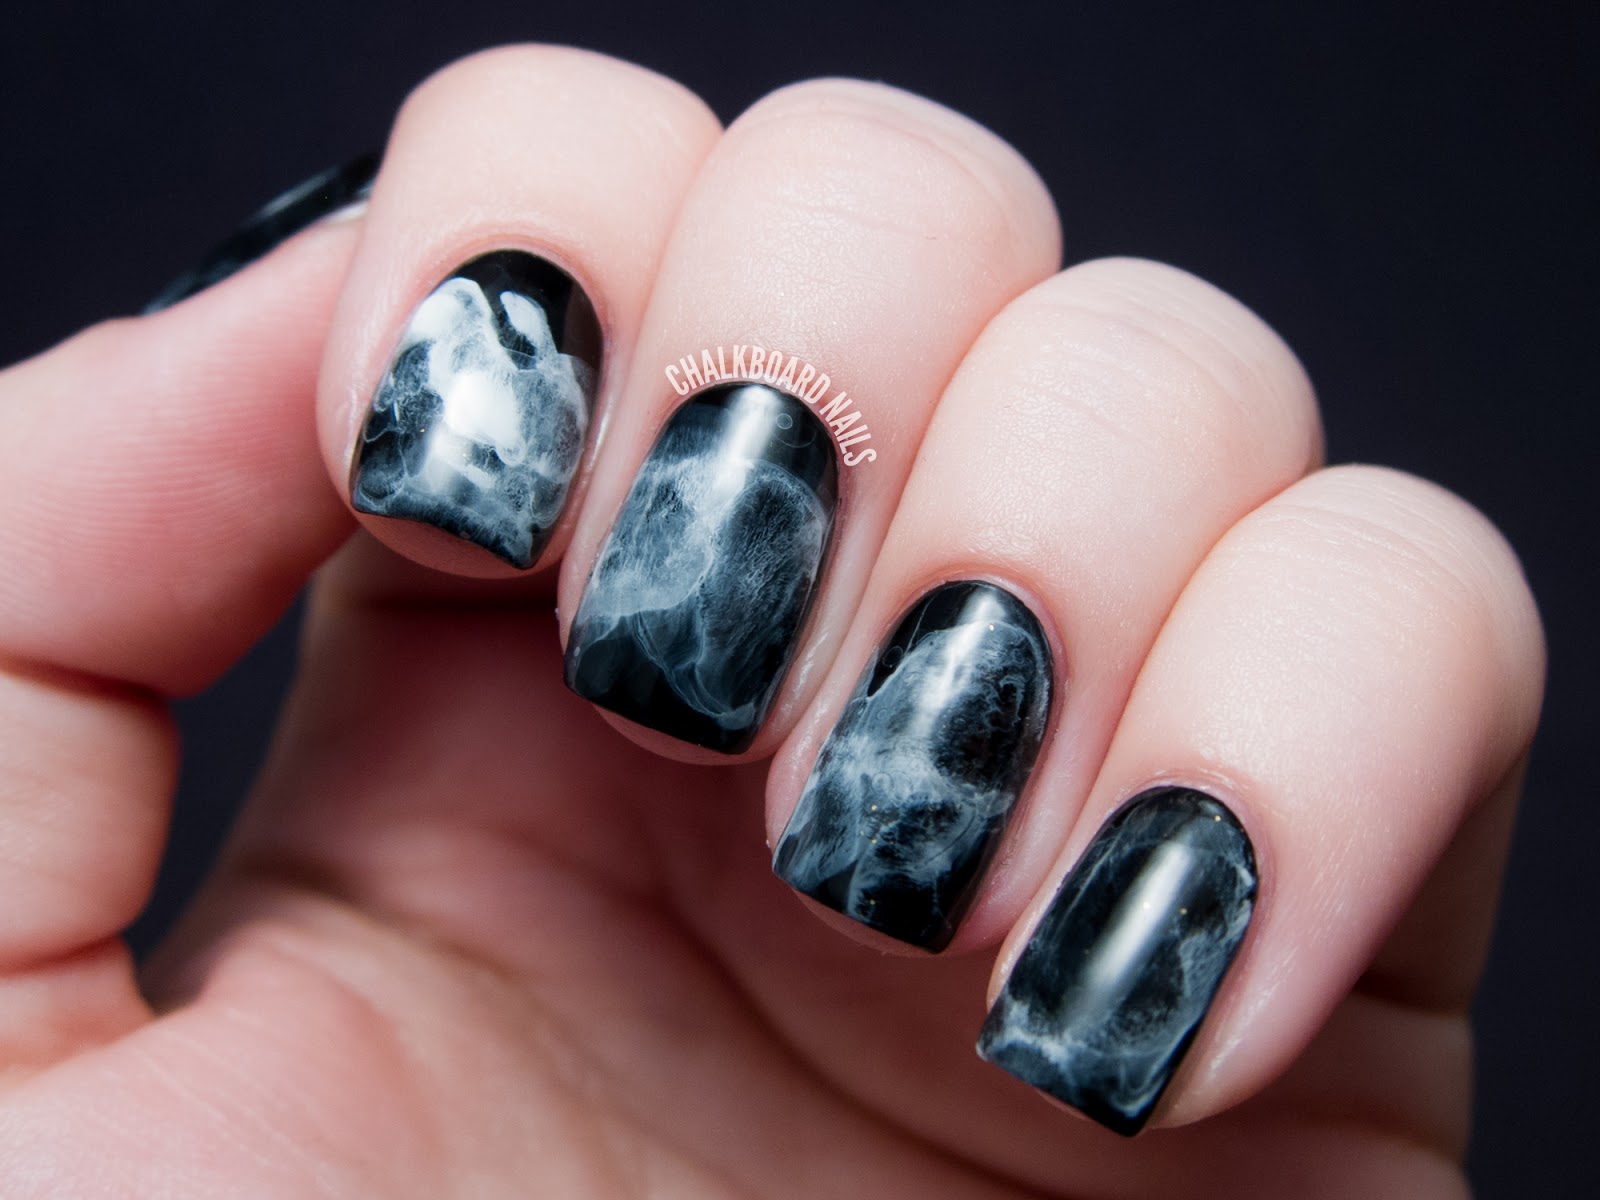 White and Black Nail Art - wide 7